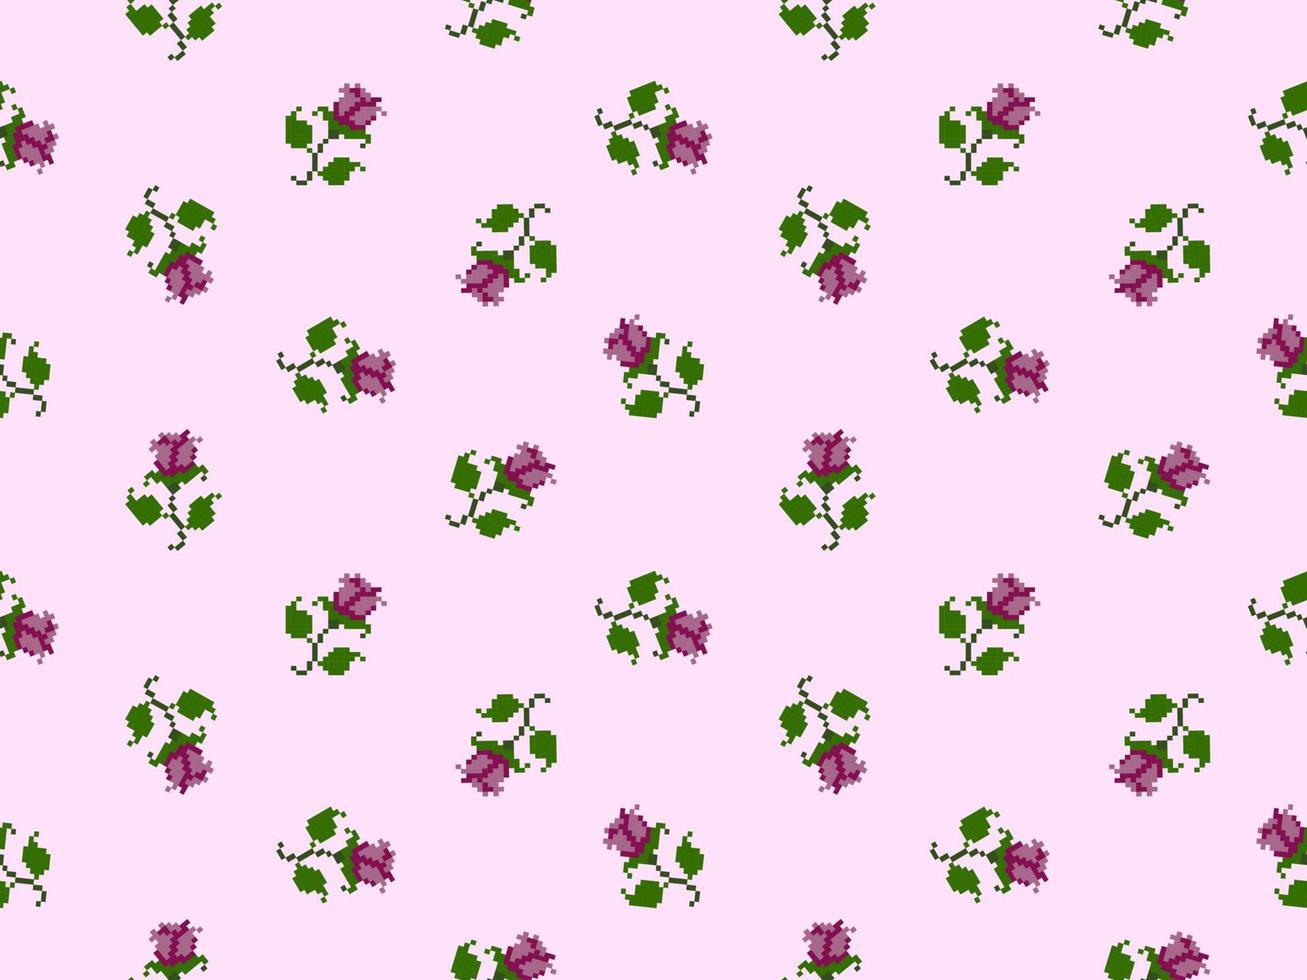 Rose cartoon character seamless pattern on pink background.Pixel style vector